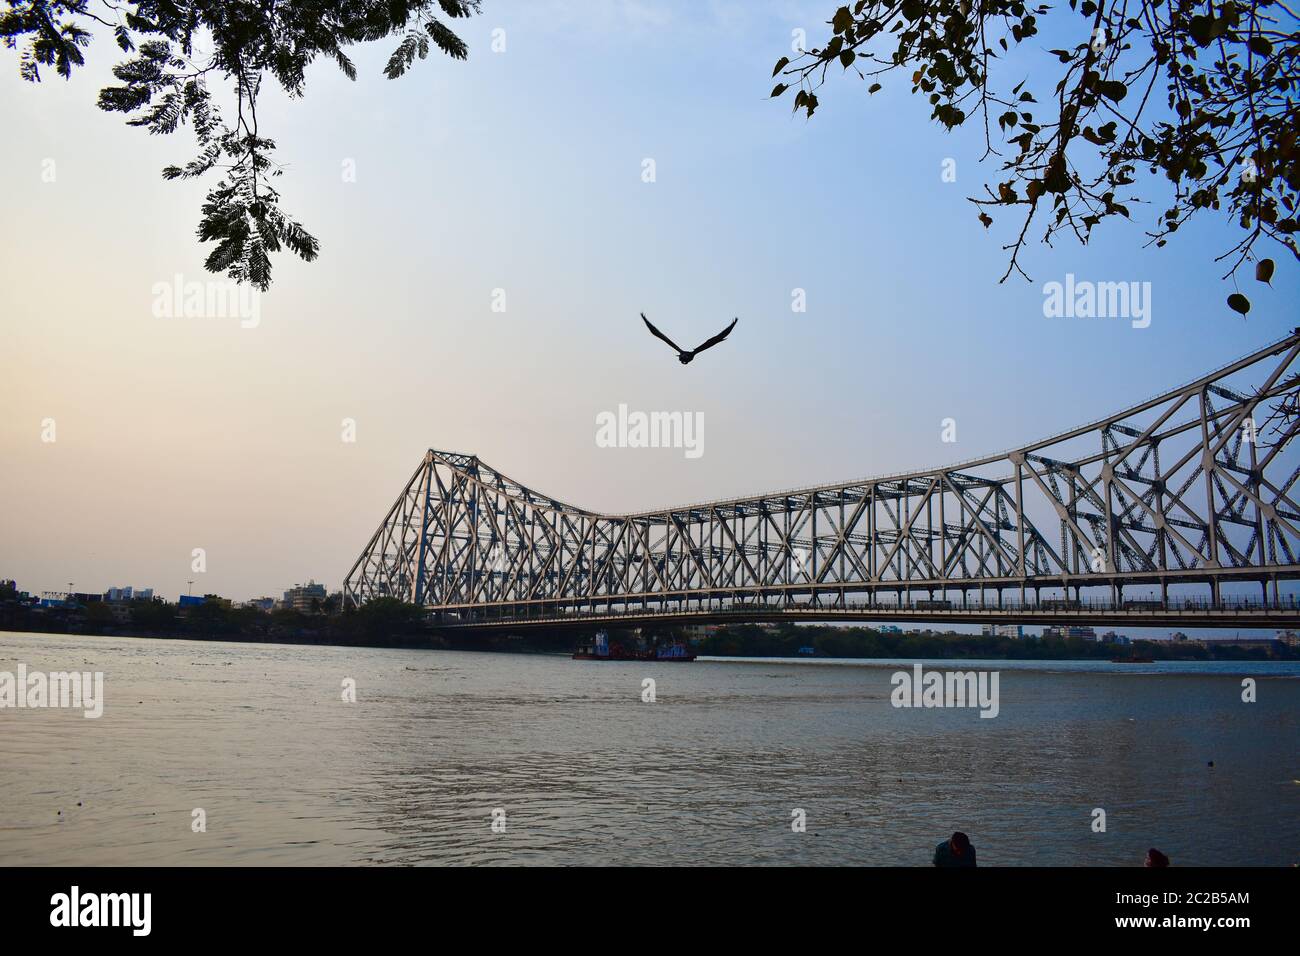 Howrah Bridge is an iconic landmark of Kolkata, India. It is a massive steel bridge constructed over the Hooghly River, was commissioned in 1943. Stock Photo